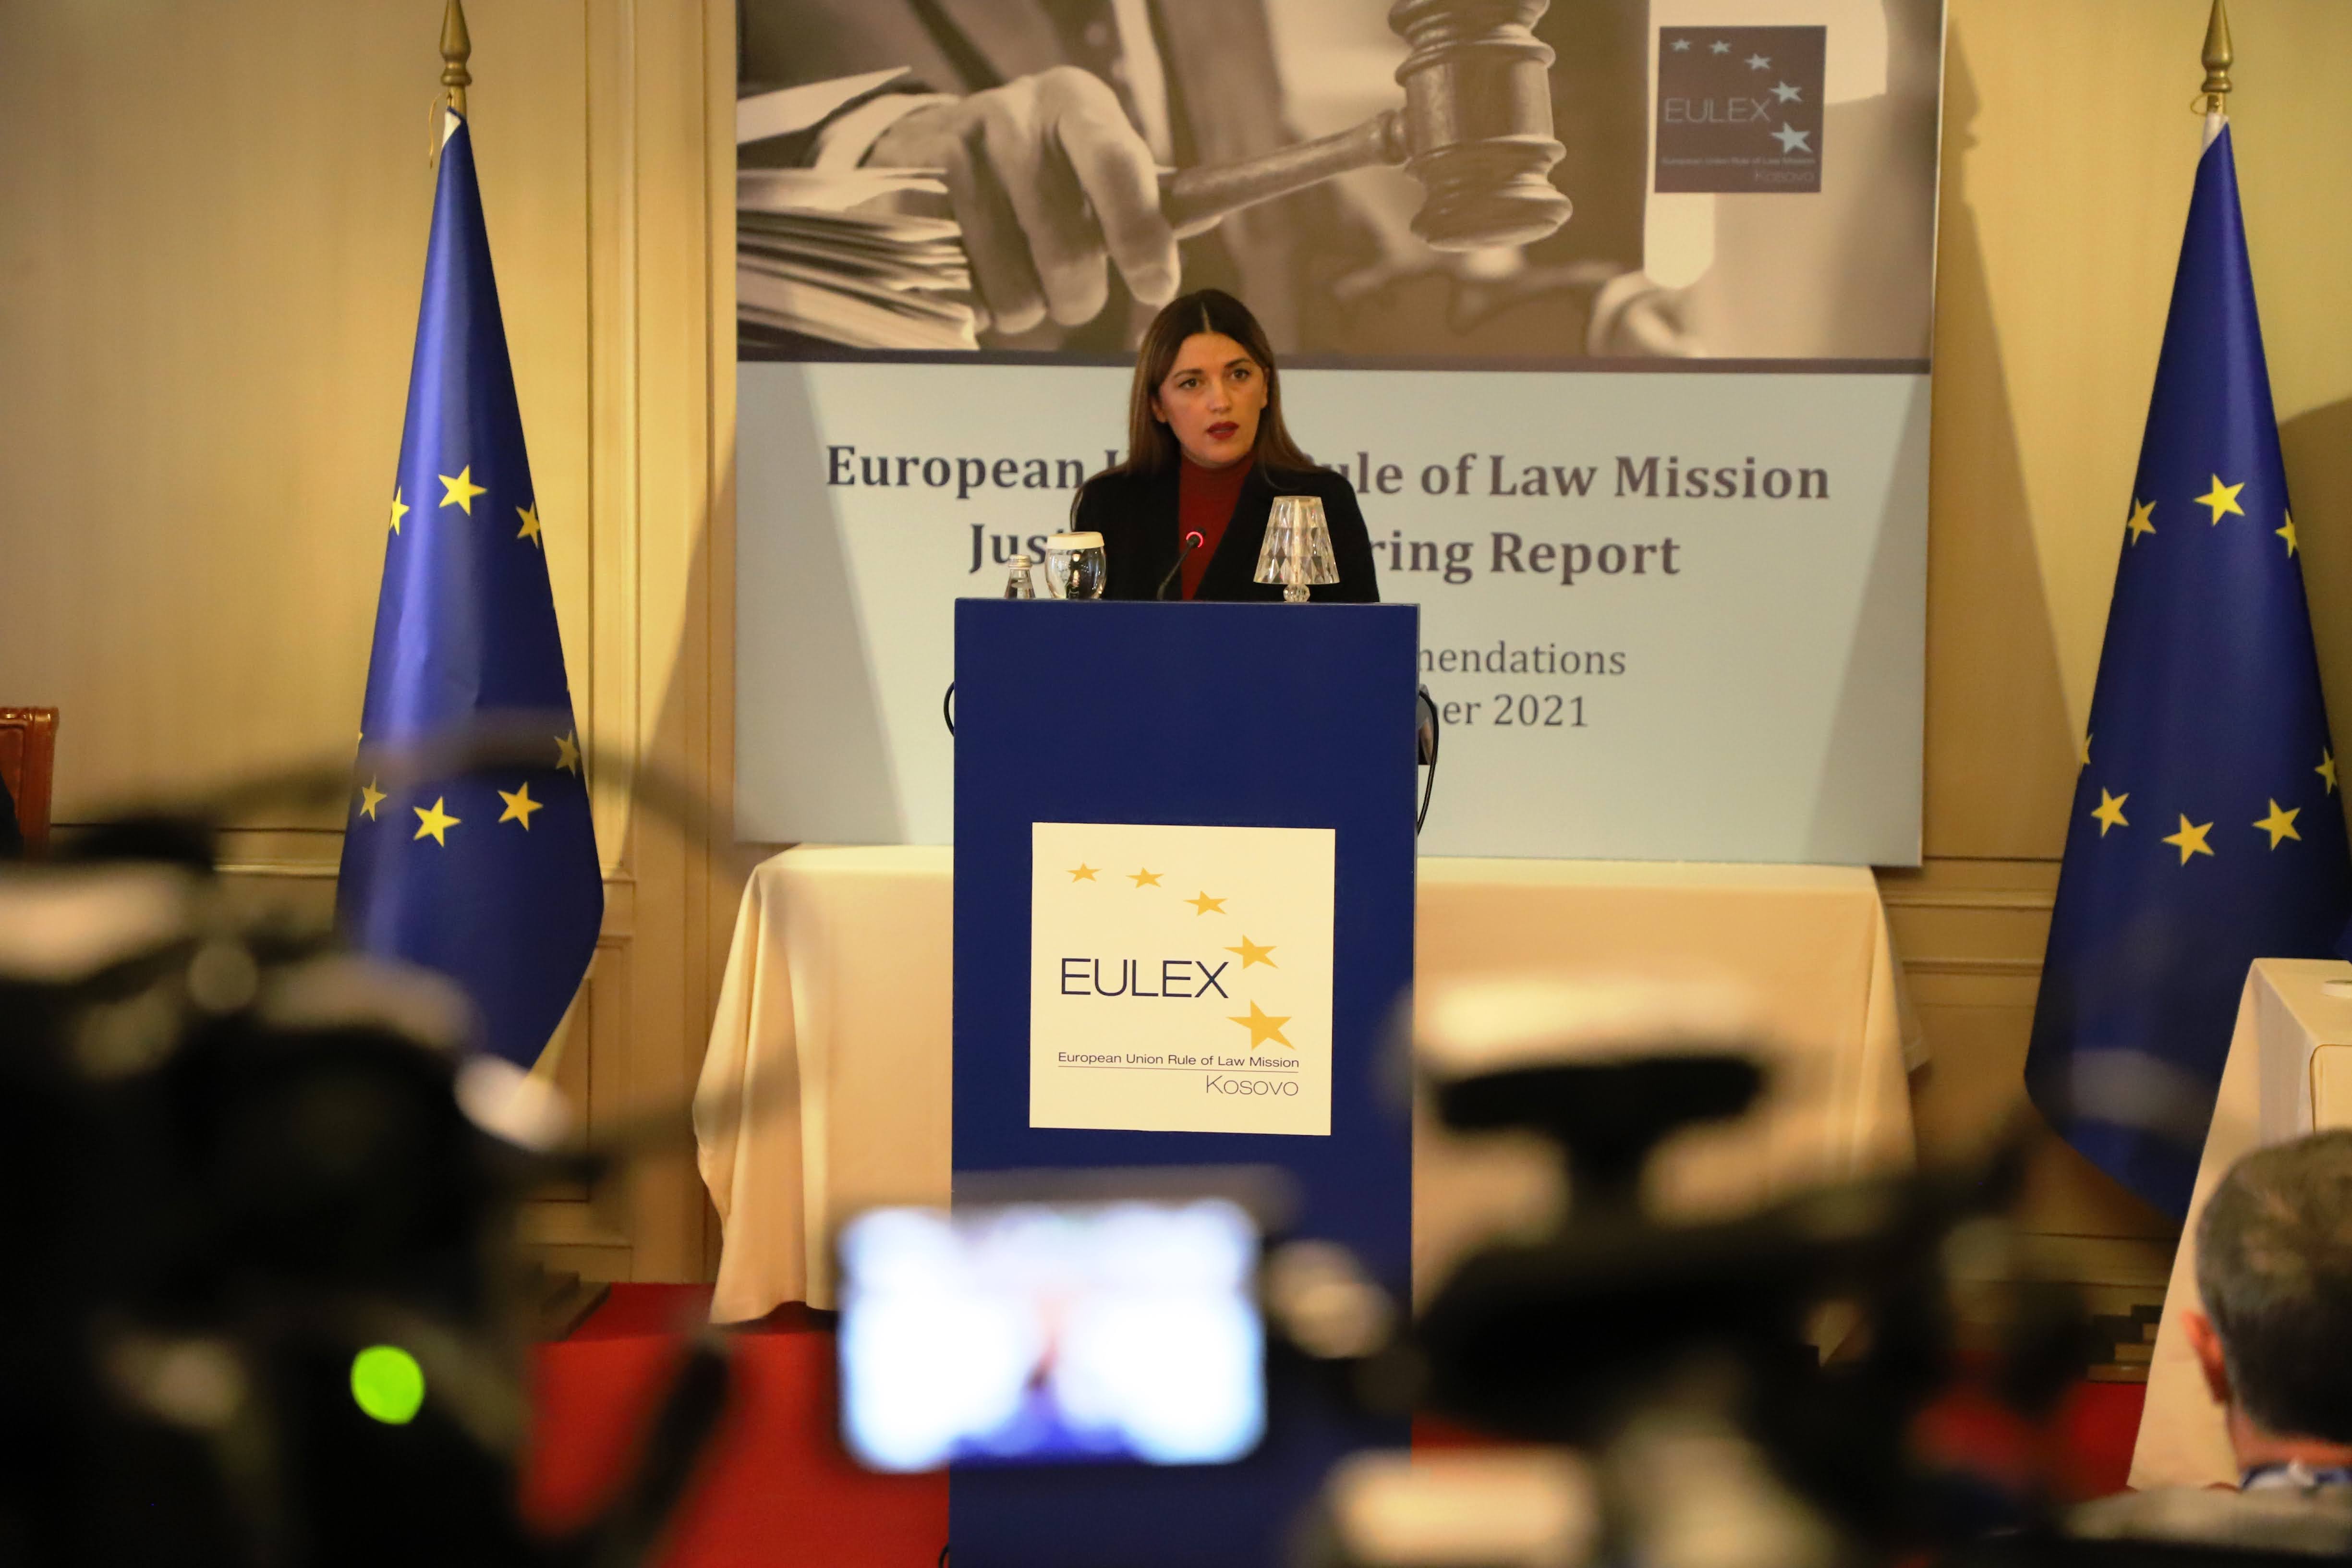 Justice Monitoring Report presented by EULEX 